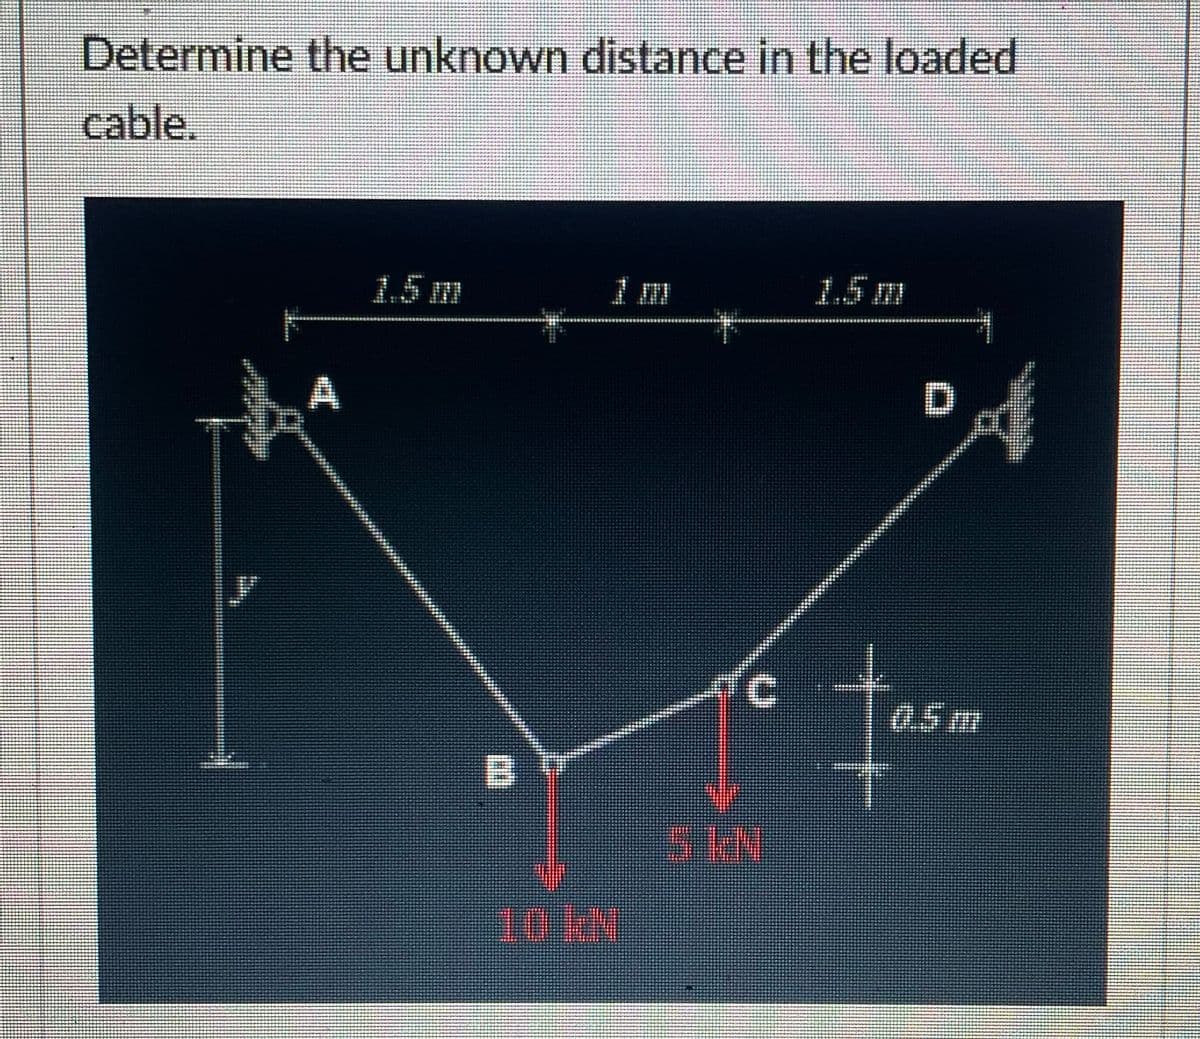 Determine the unknown distance in the loaded
cable.
1.5 m
1.5m
0.5m
S KN
